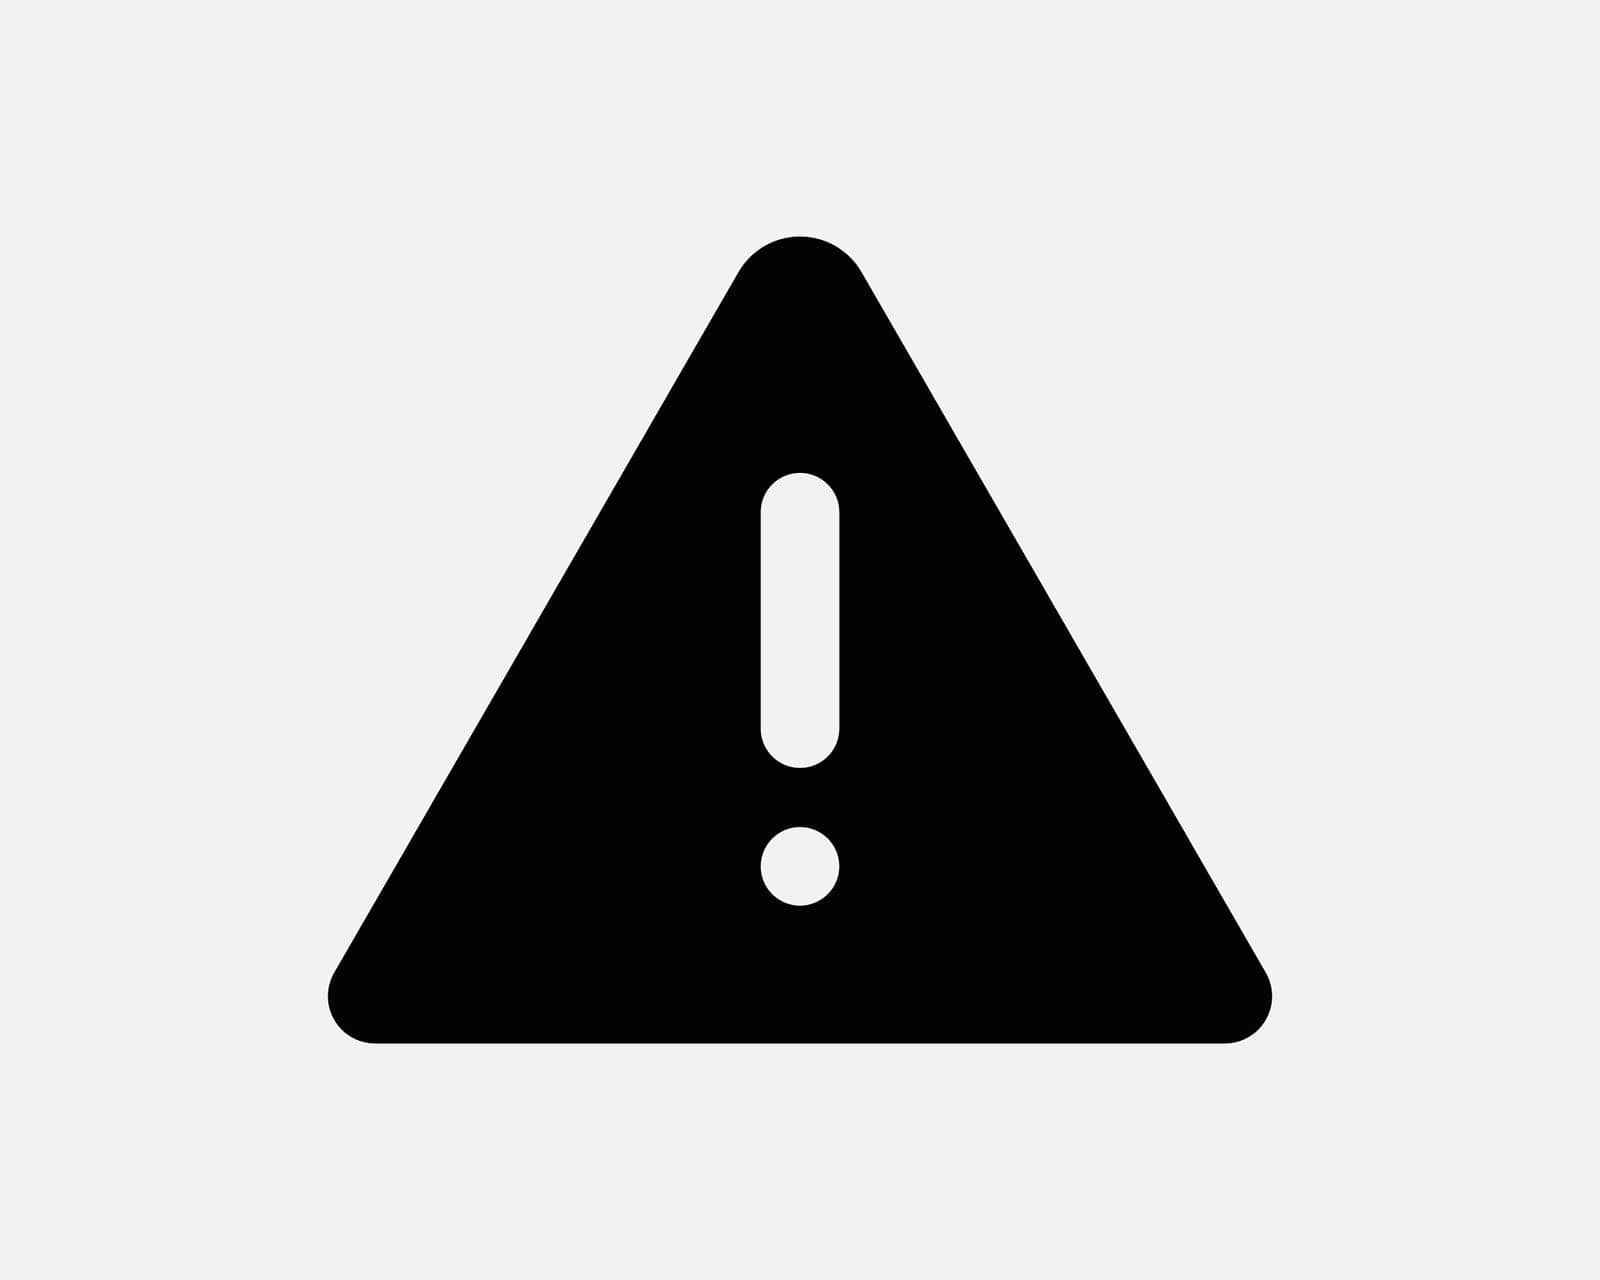 Alert Icon. Triangle Warning Notice Warn Attention Caution Beware Exclamation Mark Point. Black White Sign Symbol Artwork Graphic Clipart EPS Vector